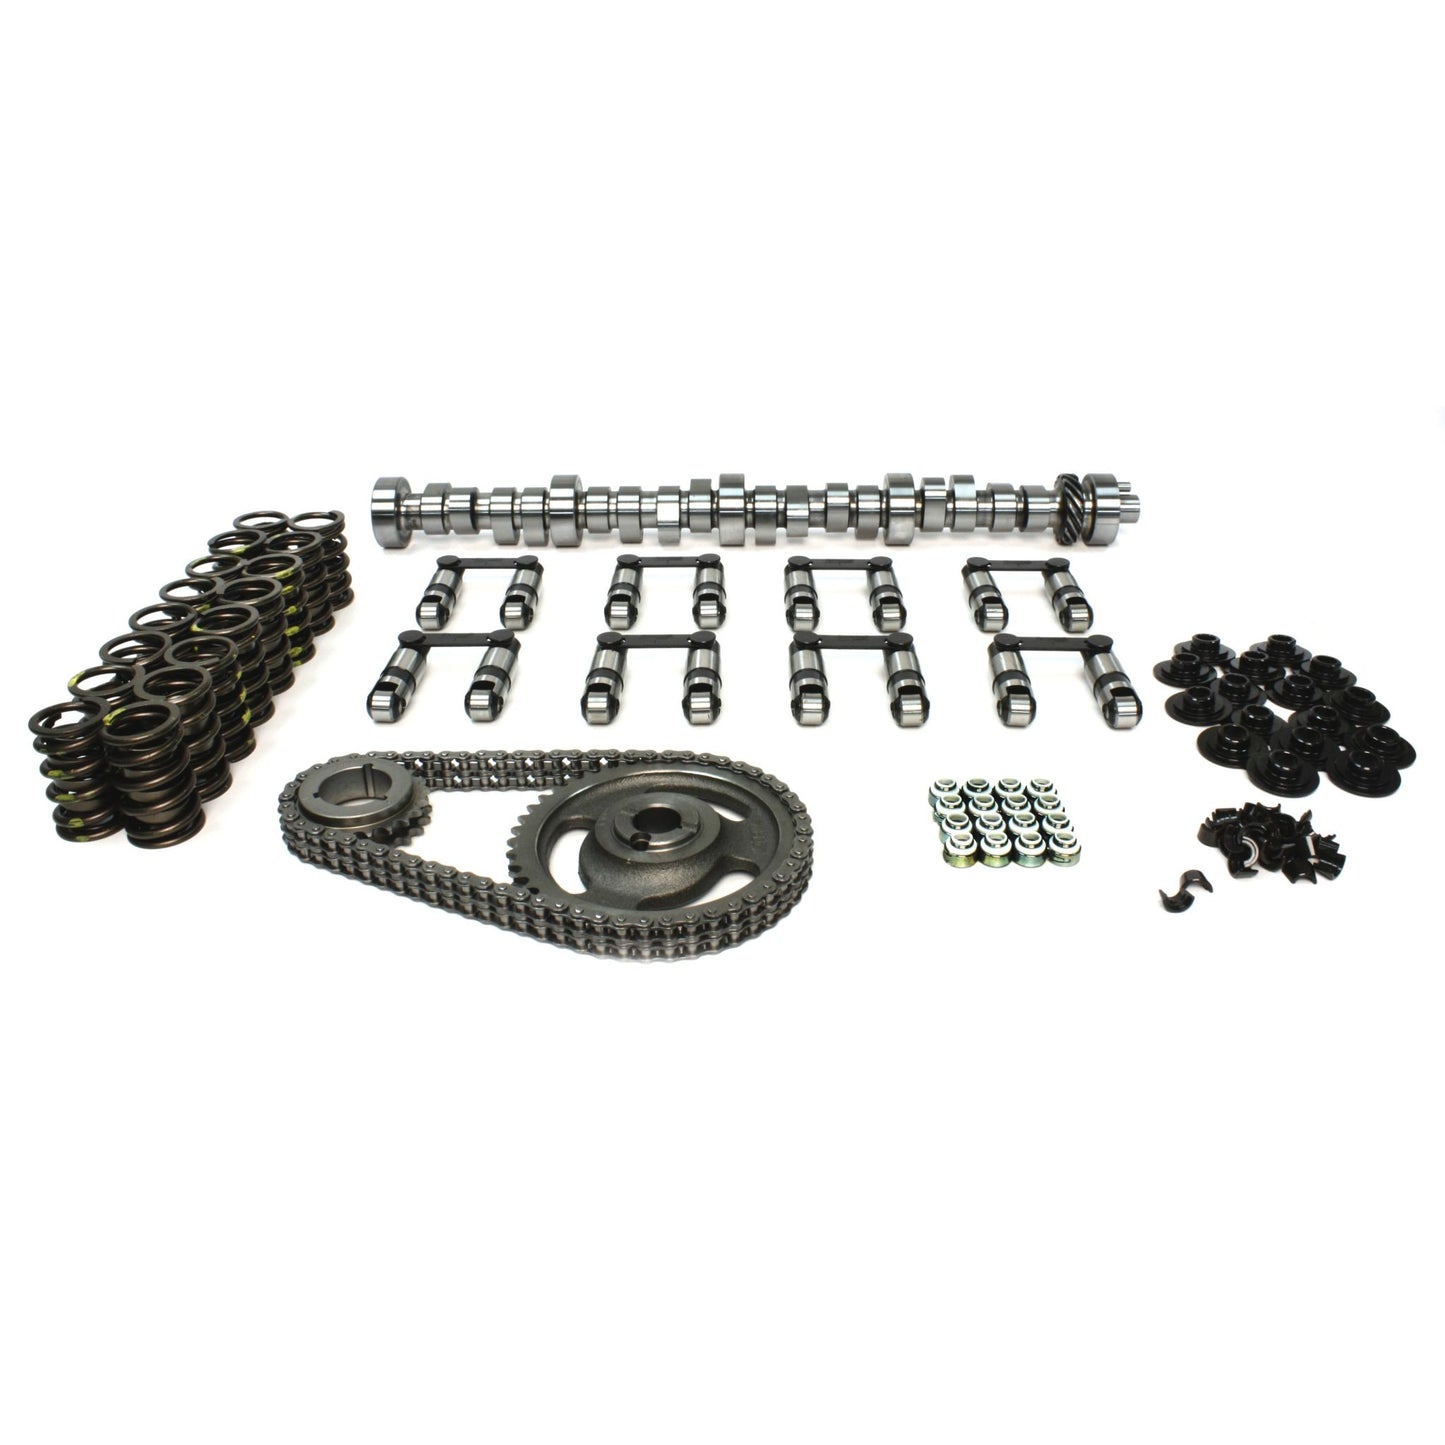 COMP Cams Mutha' Thumpr 235/249 Hydraulic Roller Cam K-Kit for Ford 429460 COMP-K34-601-9